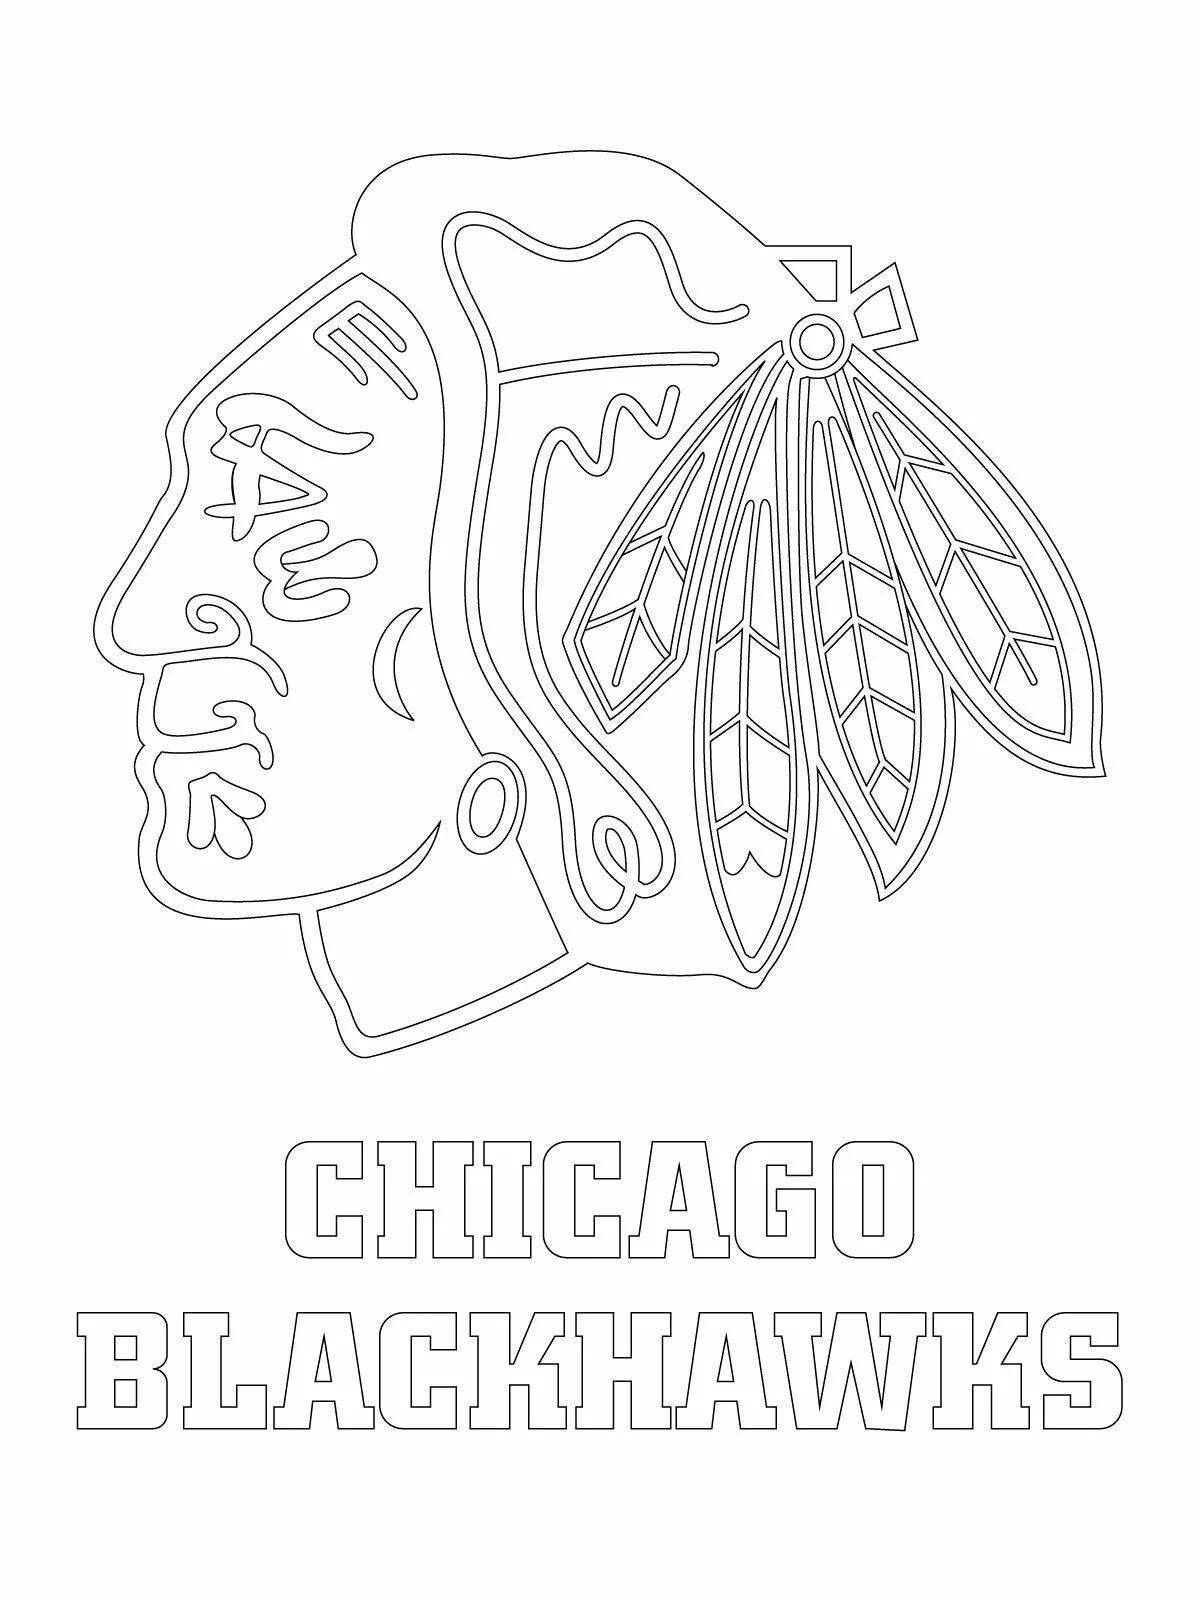 Adorable NHL Hockey Coloring Page